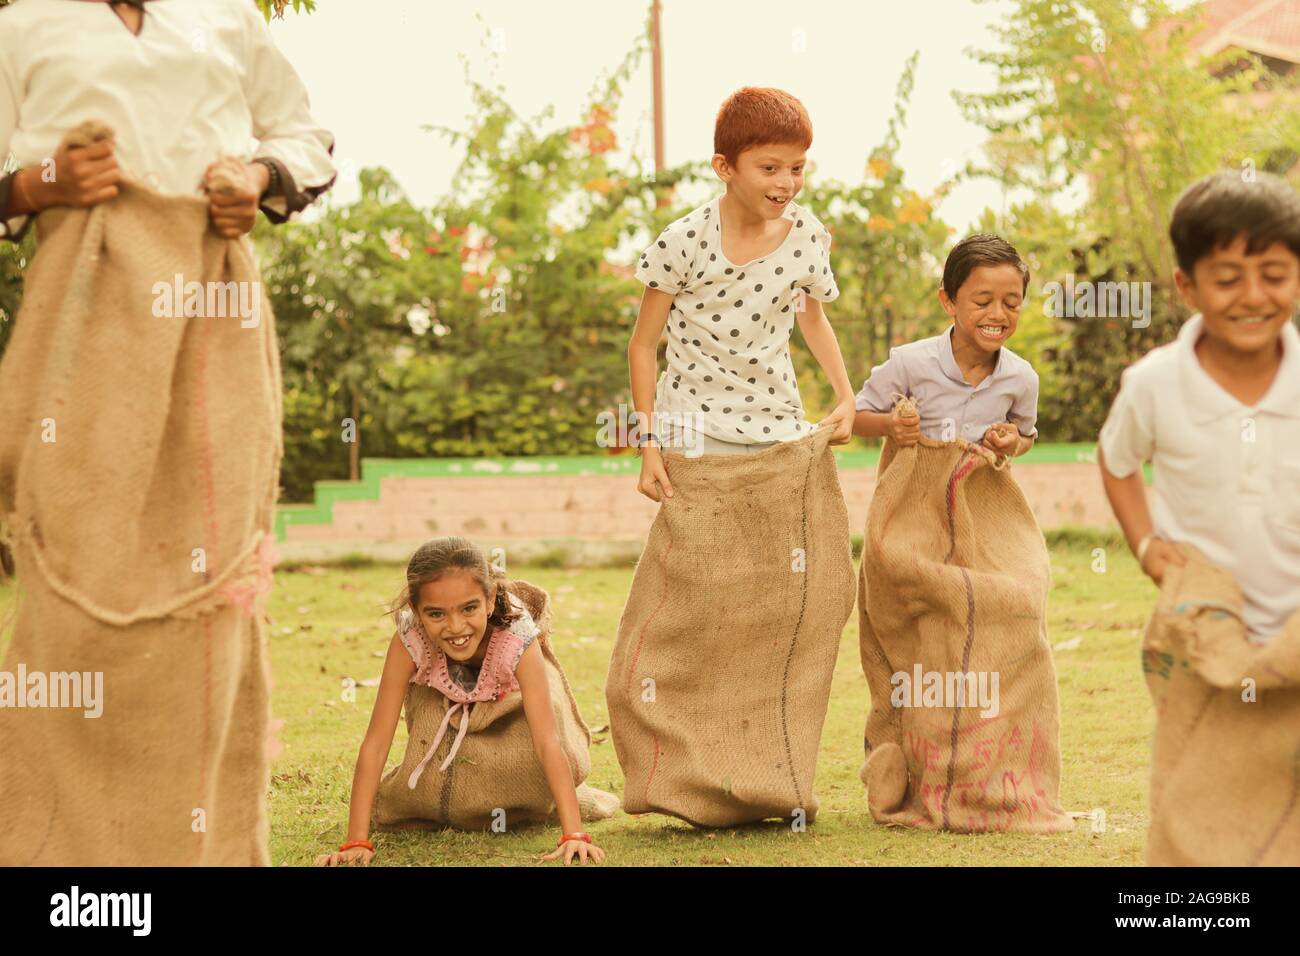 Children's playing potato sack jumping race at park outdoor - kids falling and having fun while playing gunny sack race. Stock Photo